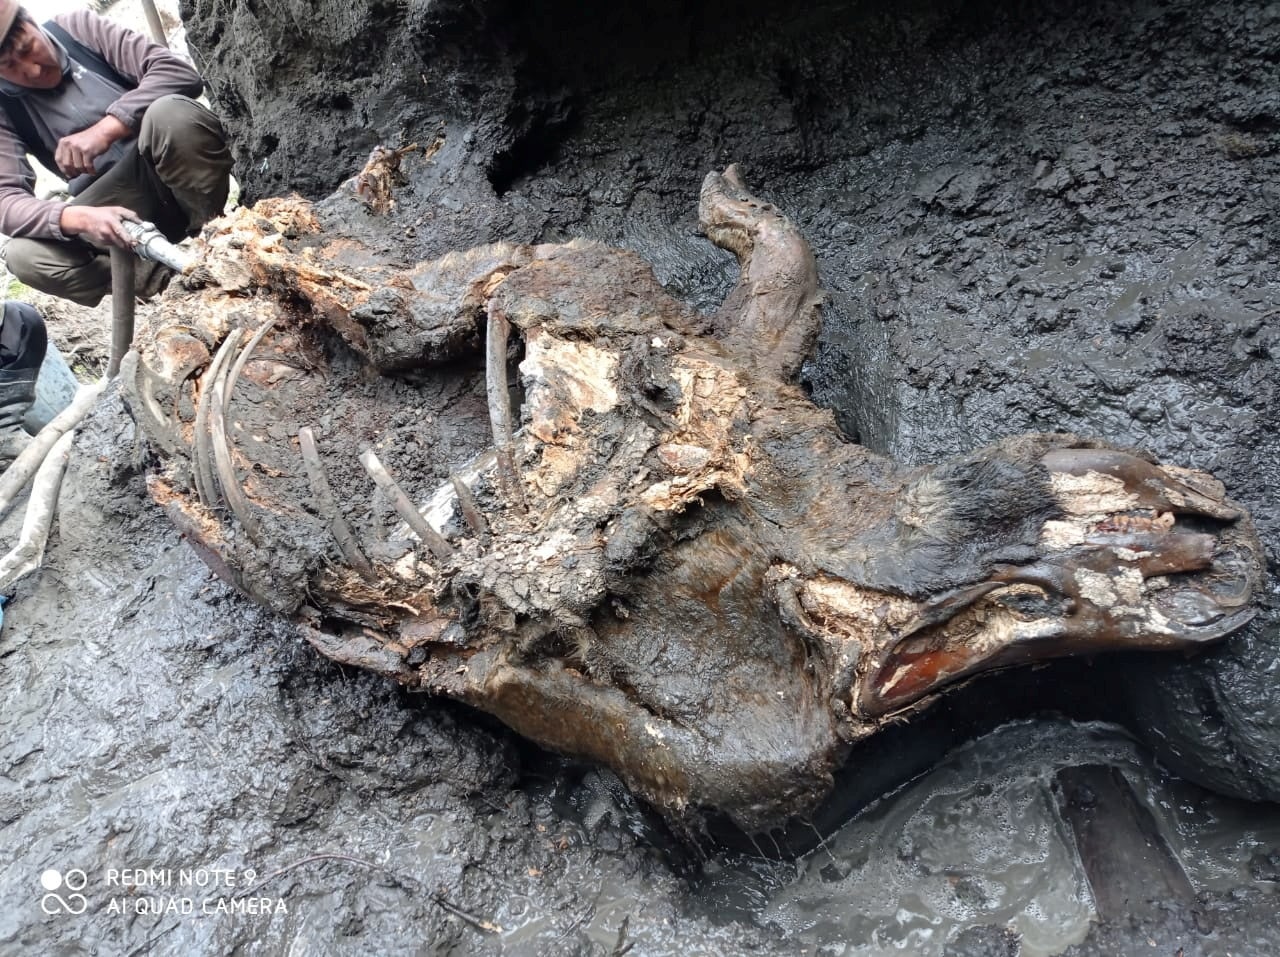 A carcass of a juvenile woolly rhinoceros, found in permafrost in August 2020 on the banks of the Tirekhtyakh river in the region of Yakutia in eastern Siberia, Russia